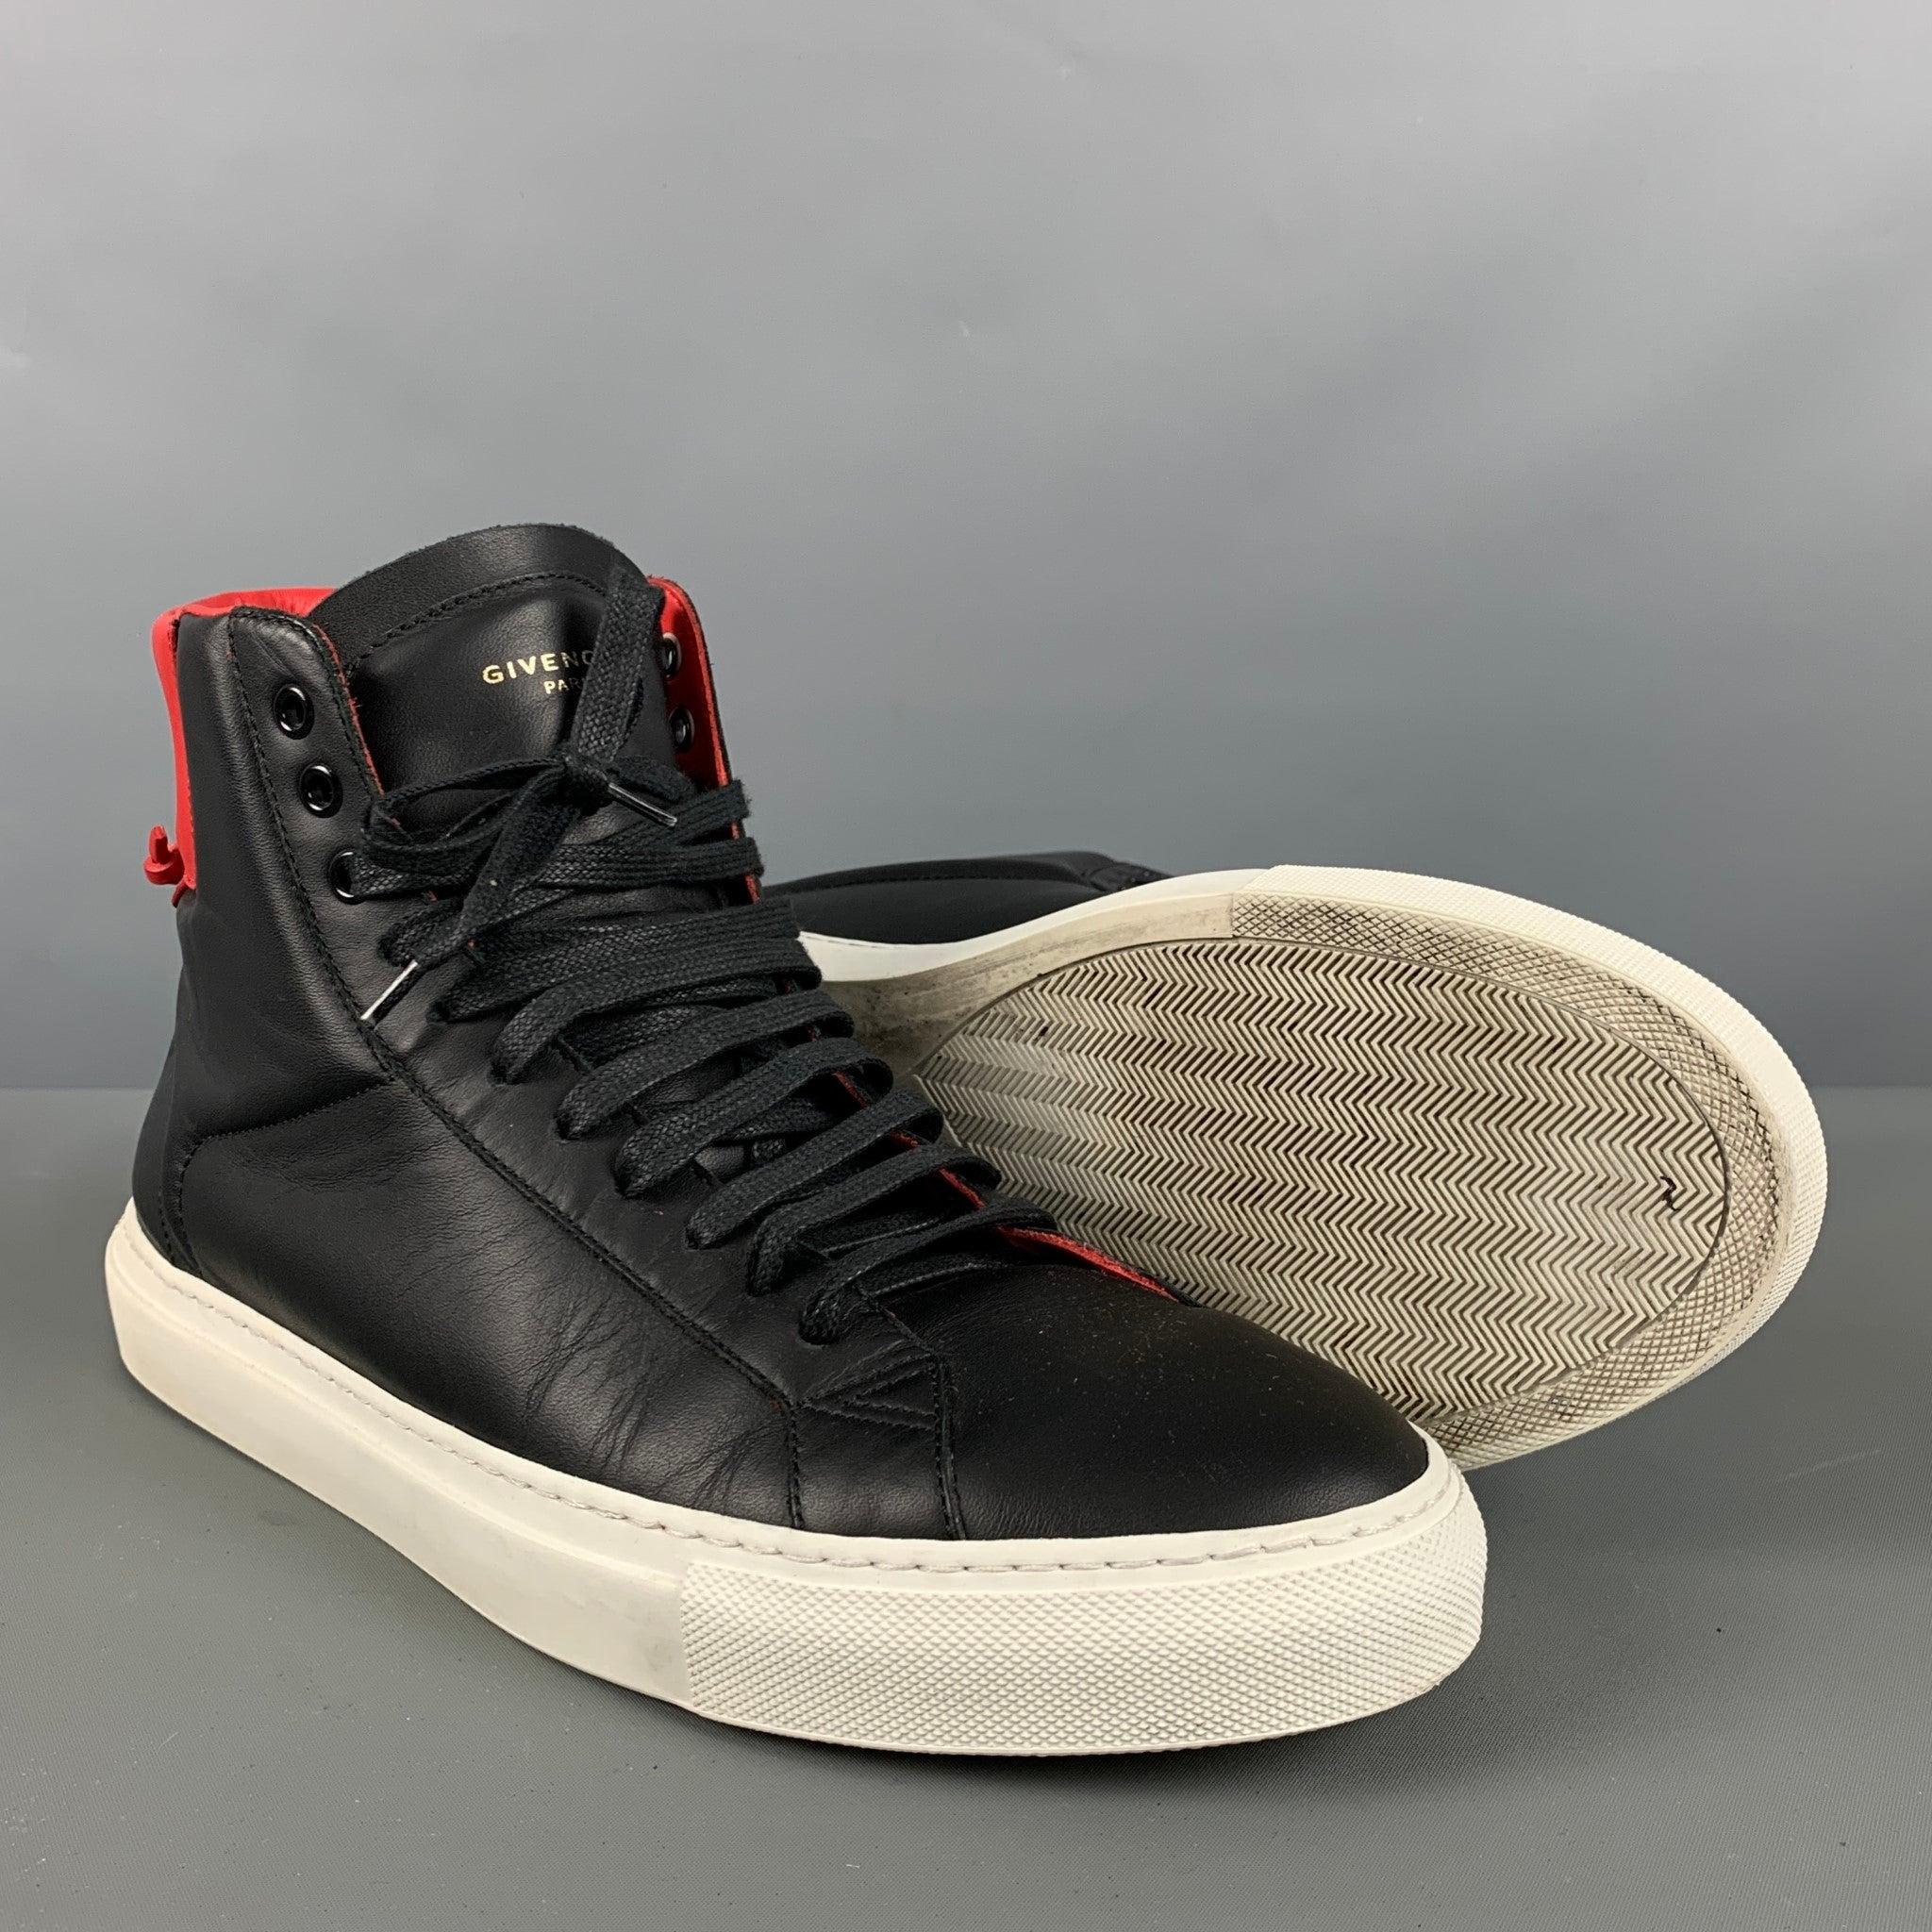 GIVENCHY Size 10 Black Red & White Color Block Leather High Top Sneakers For Sale 1